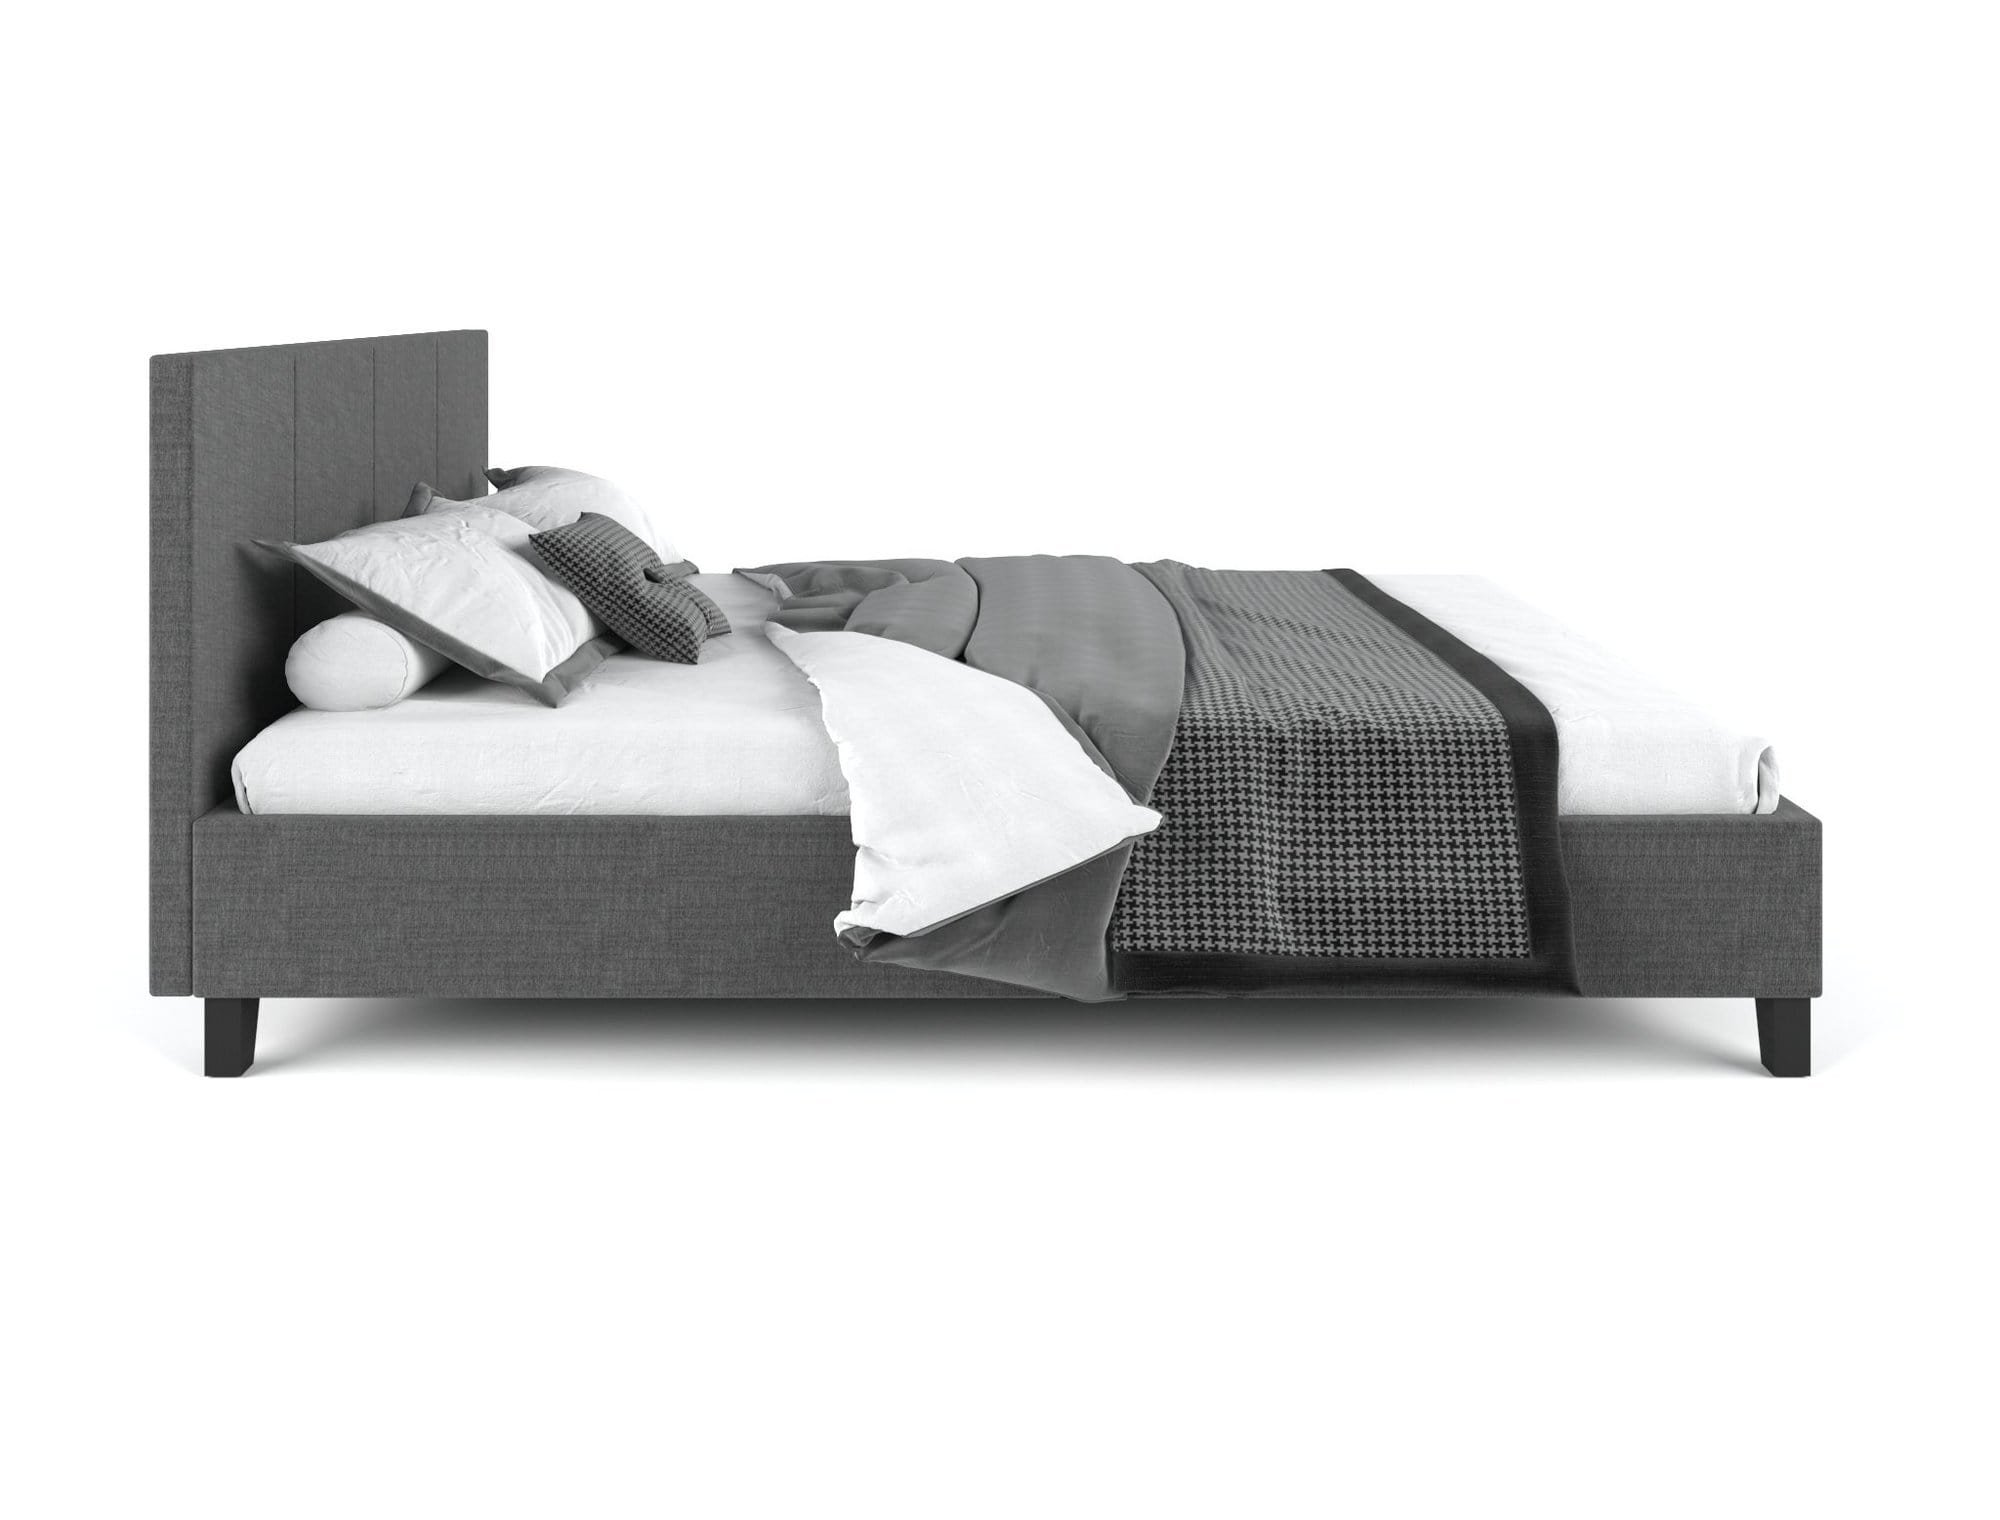 Pale Fabric Bed Frame - Charcoal King - Newstart Furniture